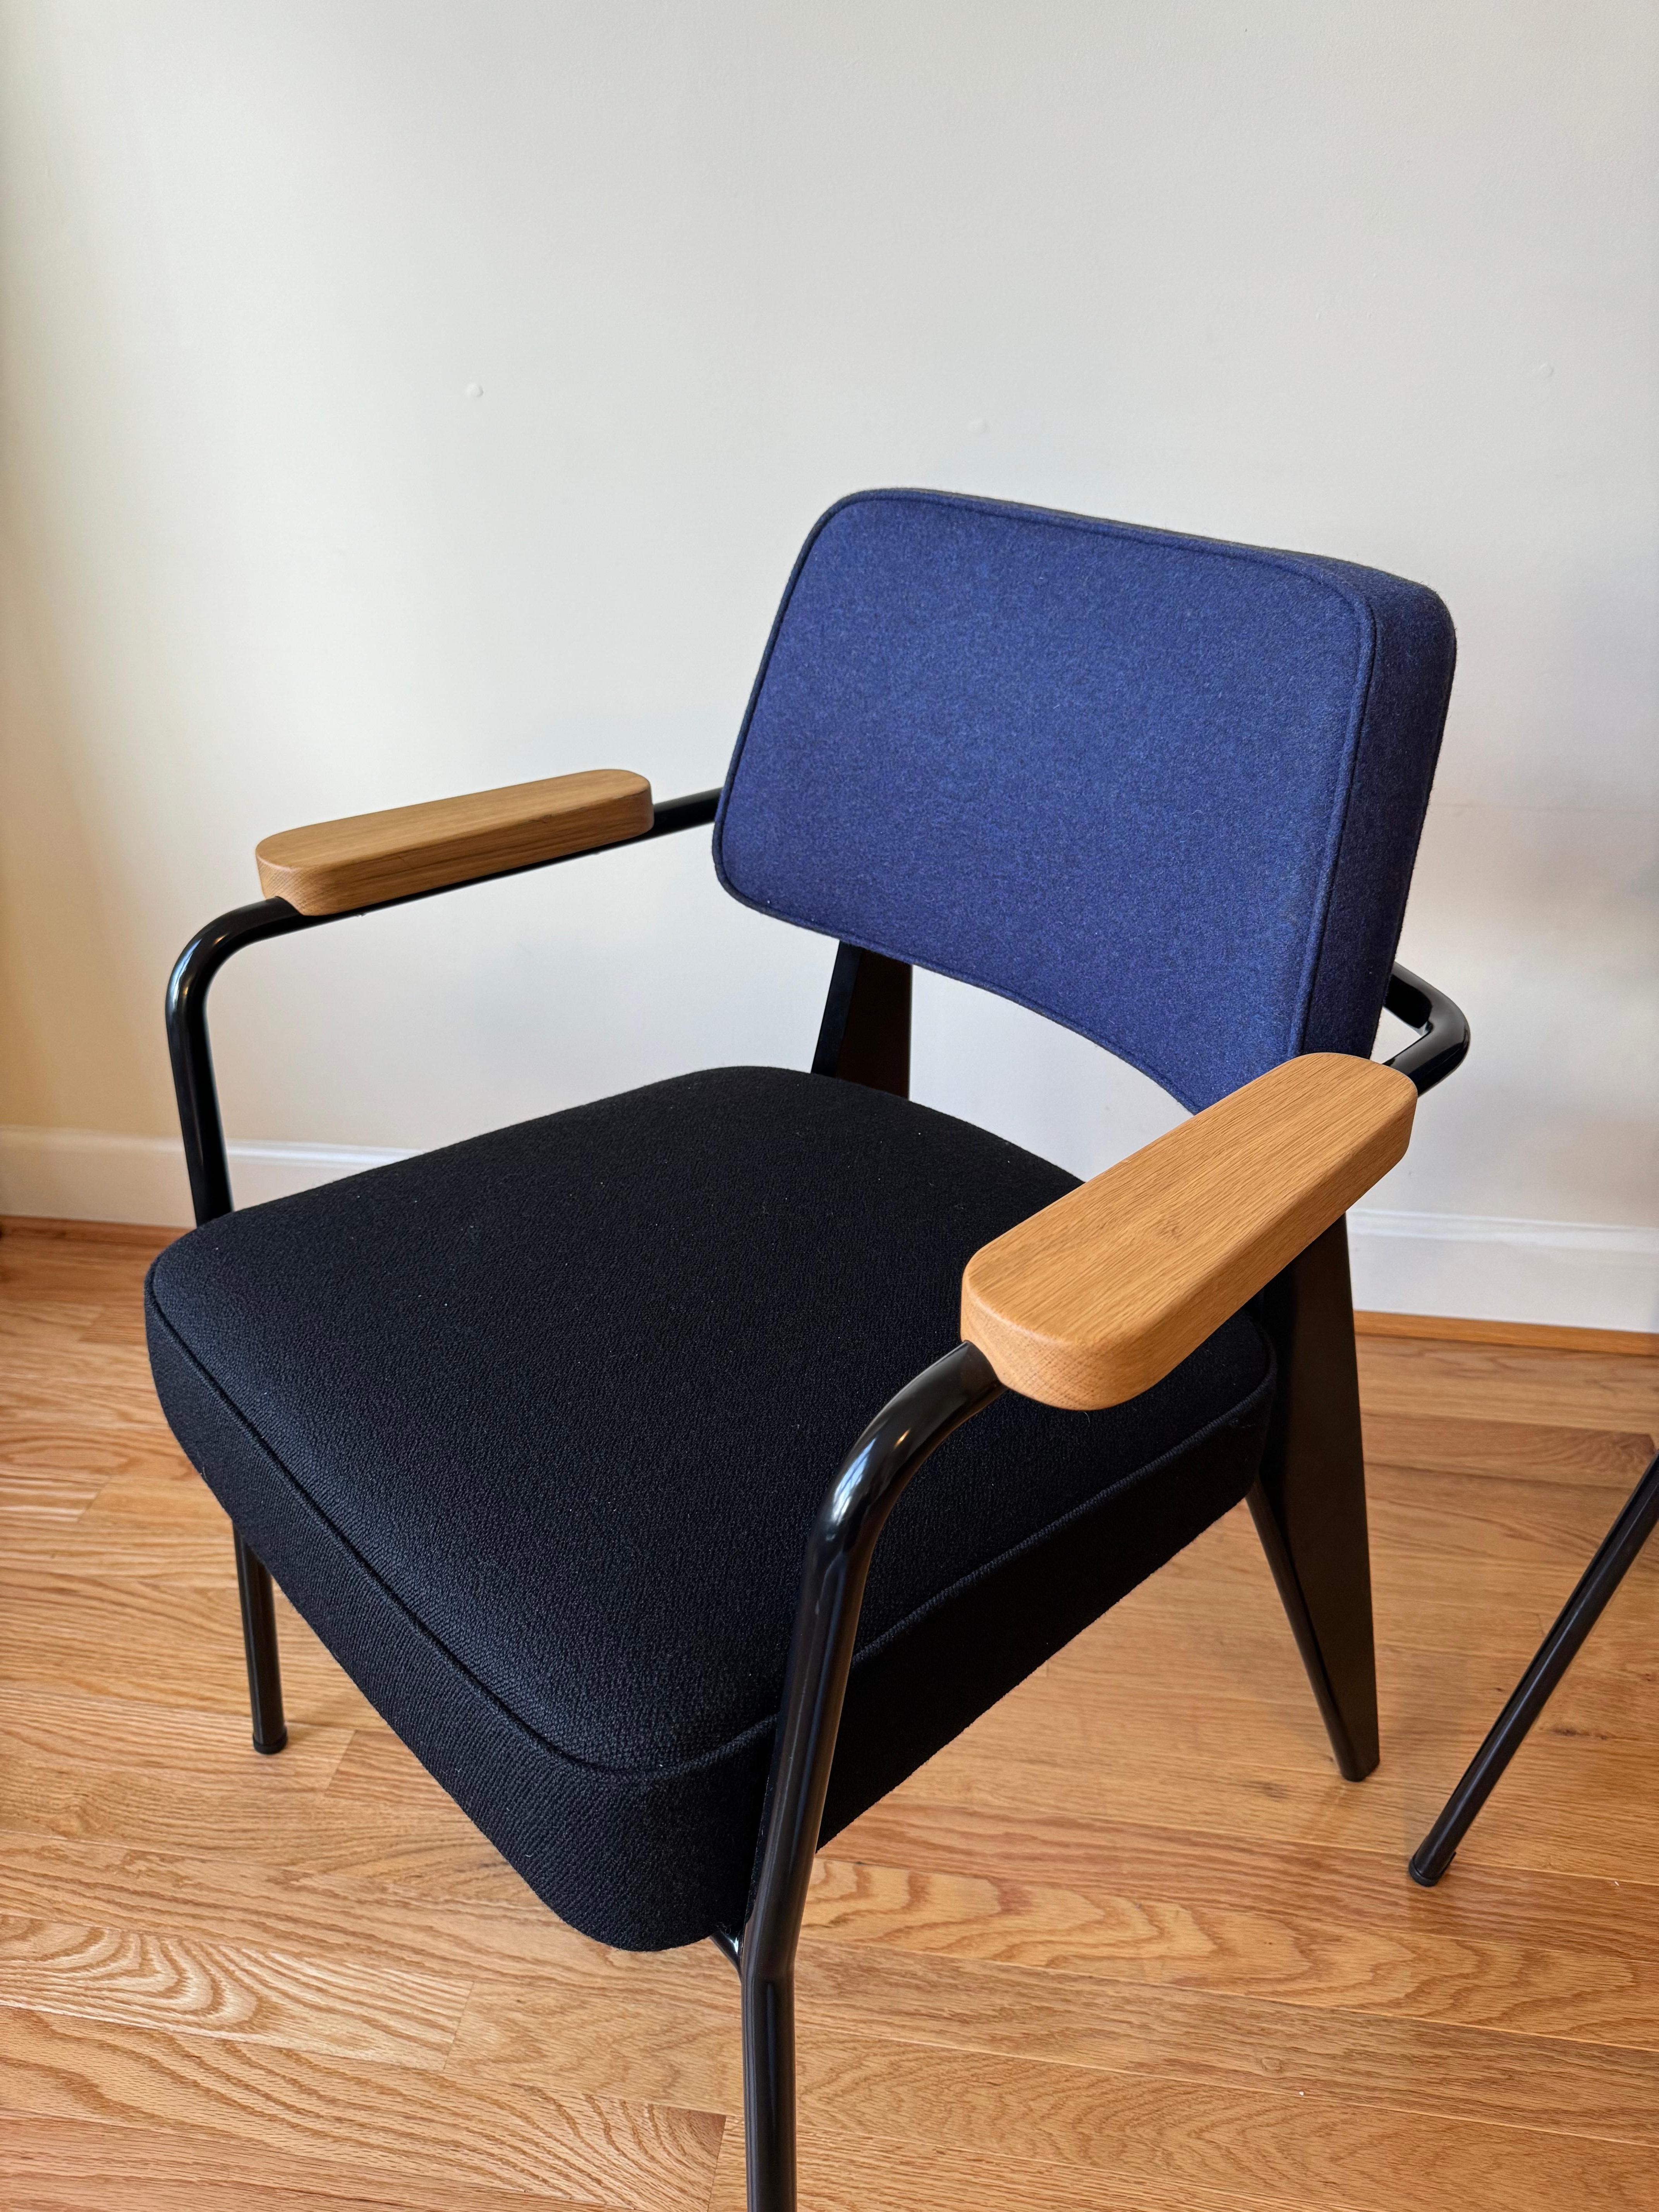 Mid-20th Century Fauteuil Direction by Jean Prouvé for VITRA 